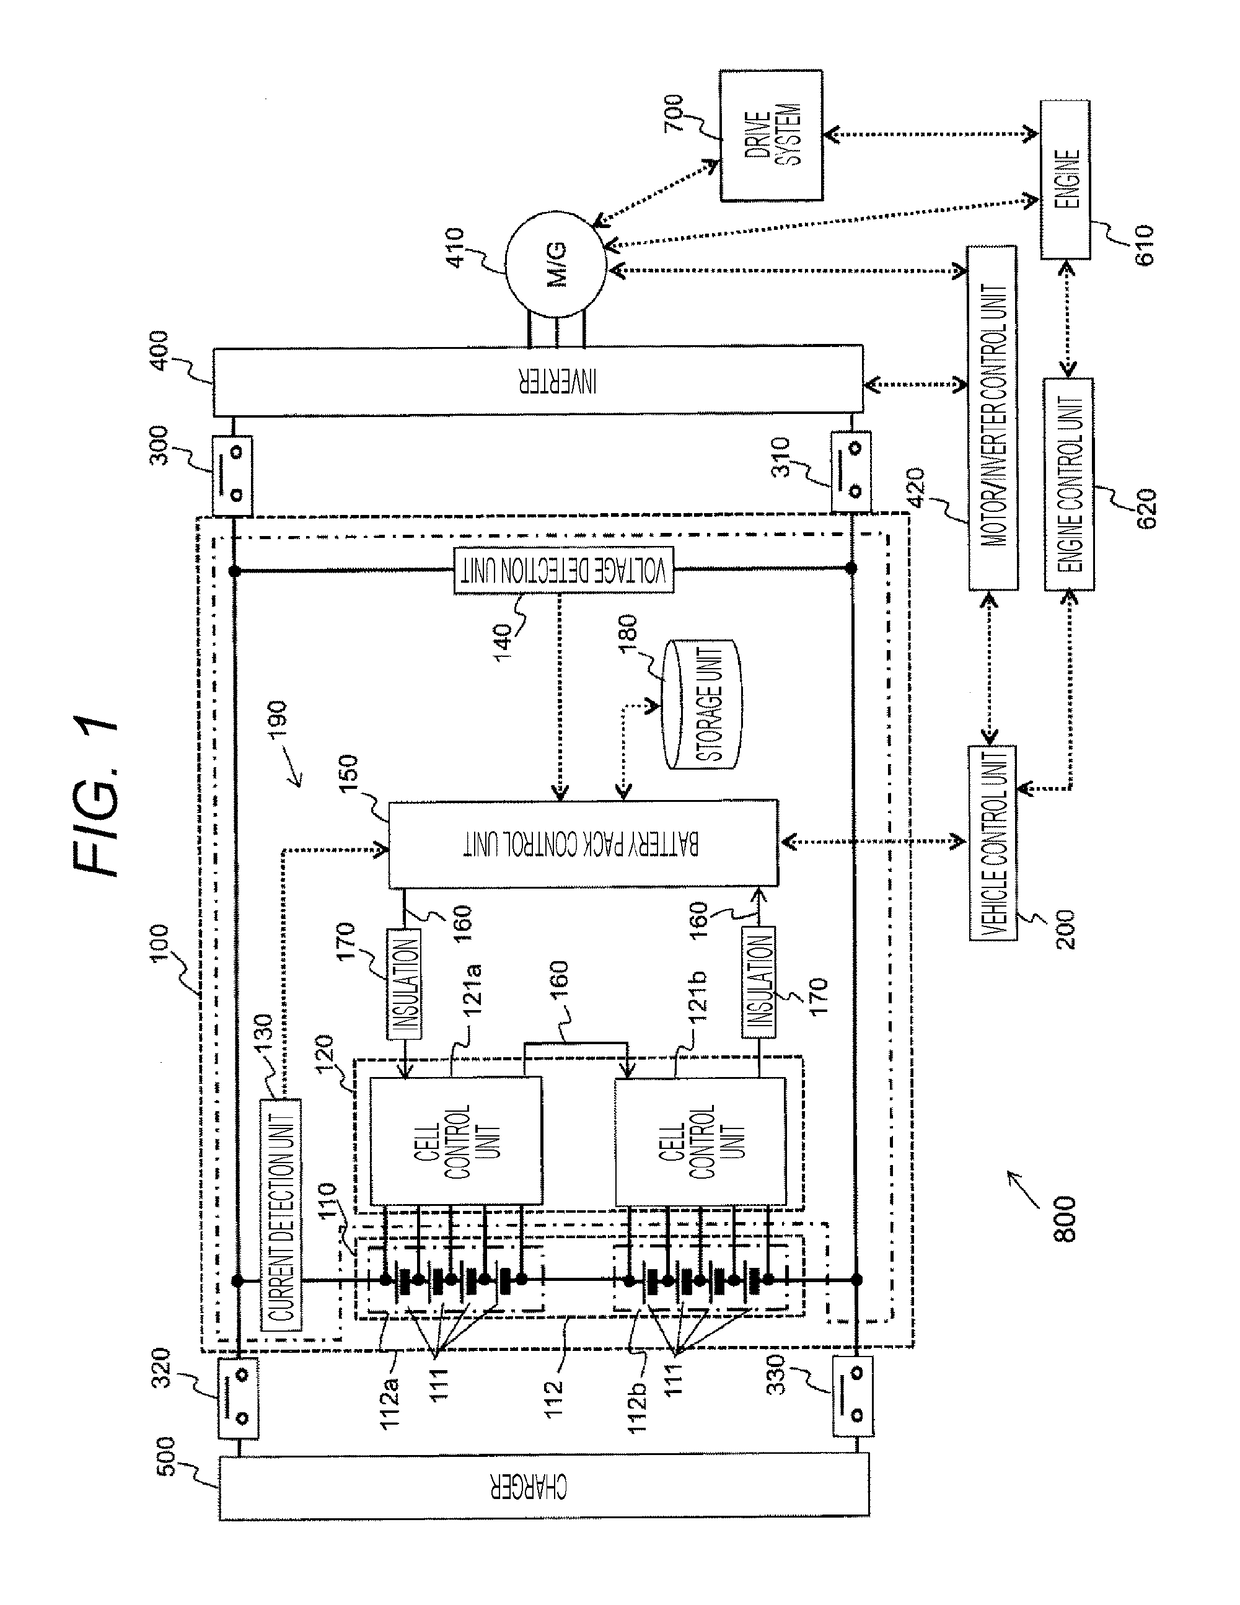 Battery control device and electric motor vehicle system